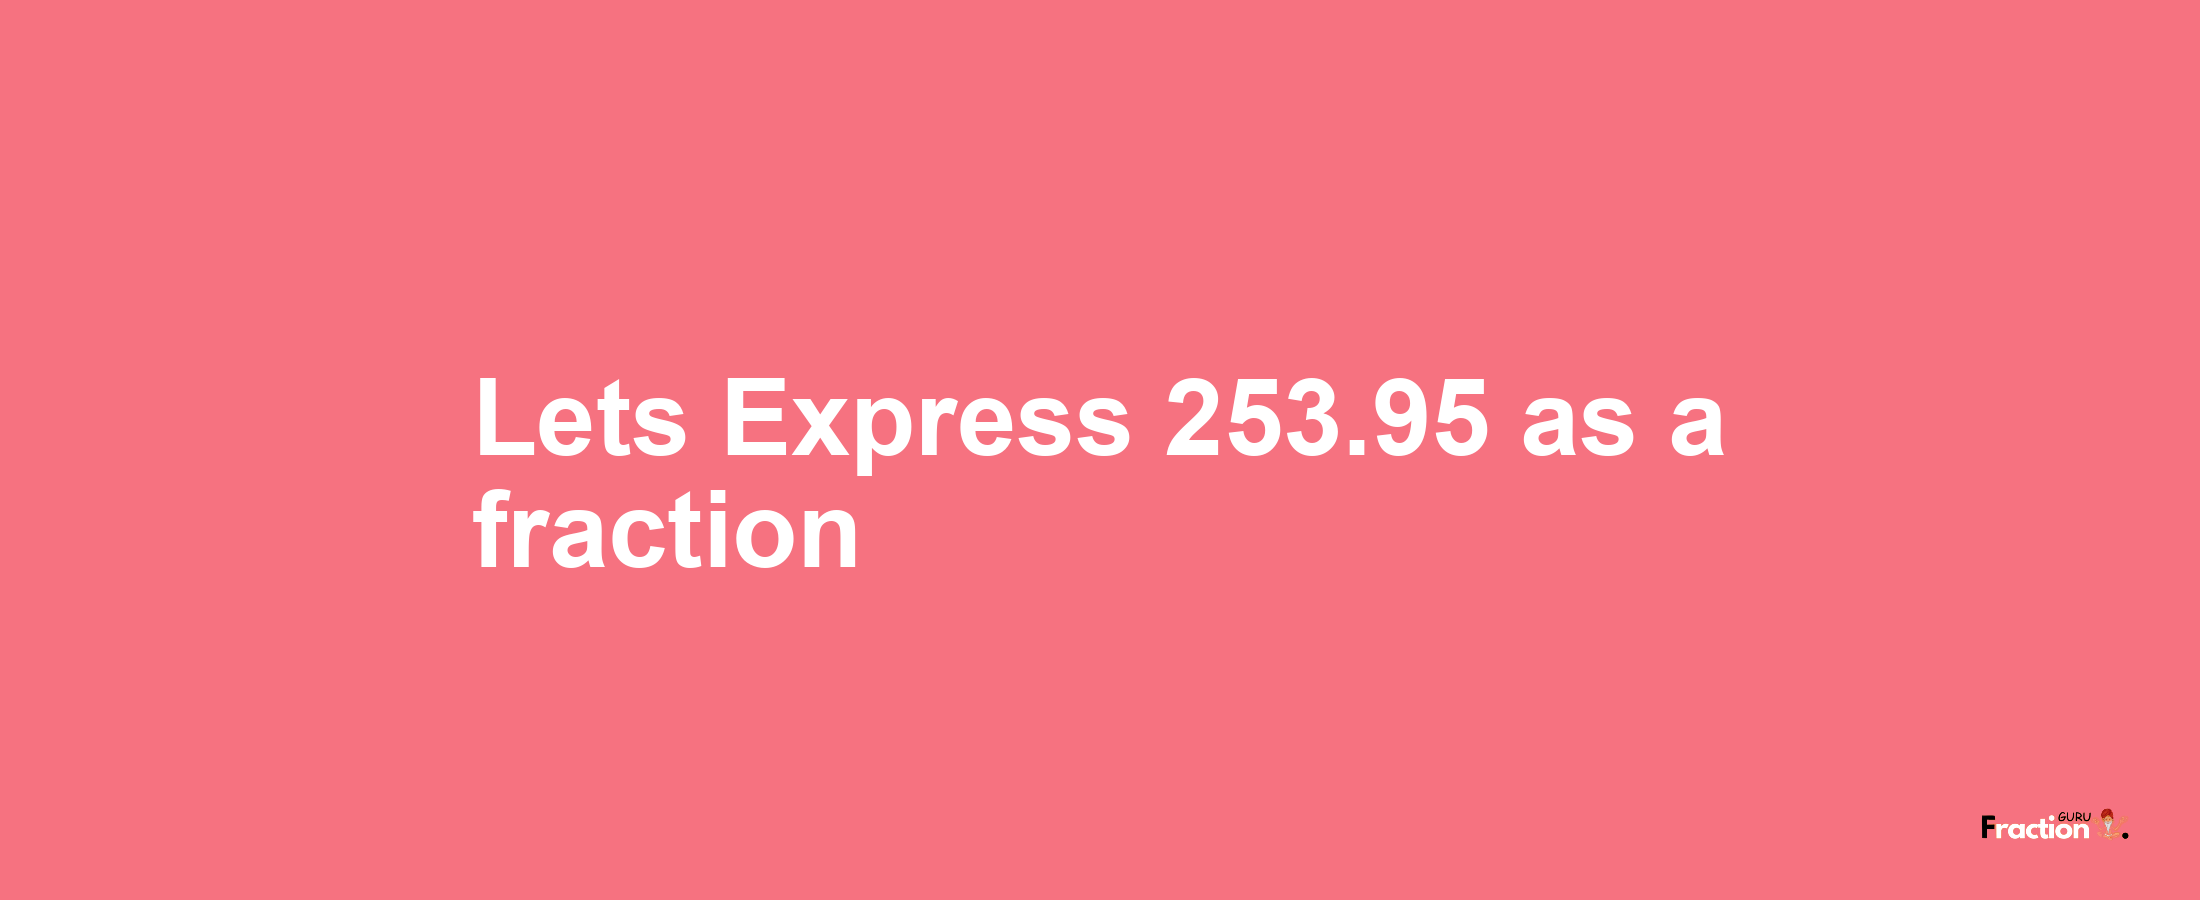 Lets Express 253.95 as afraction